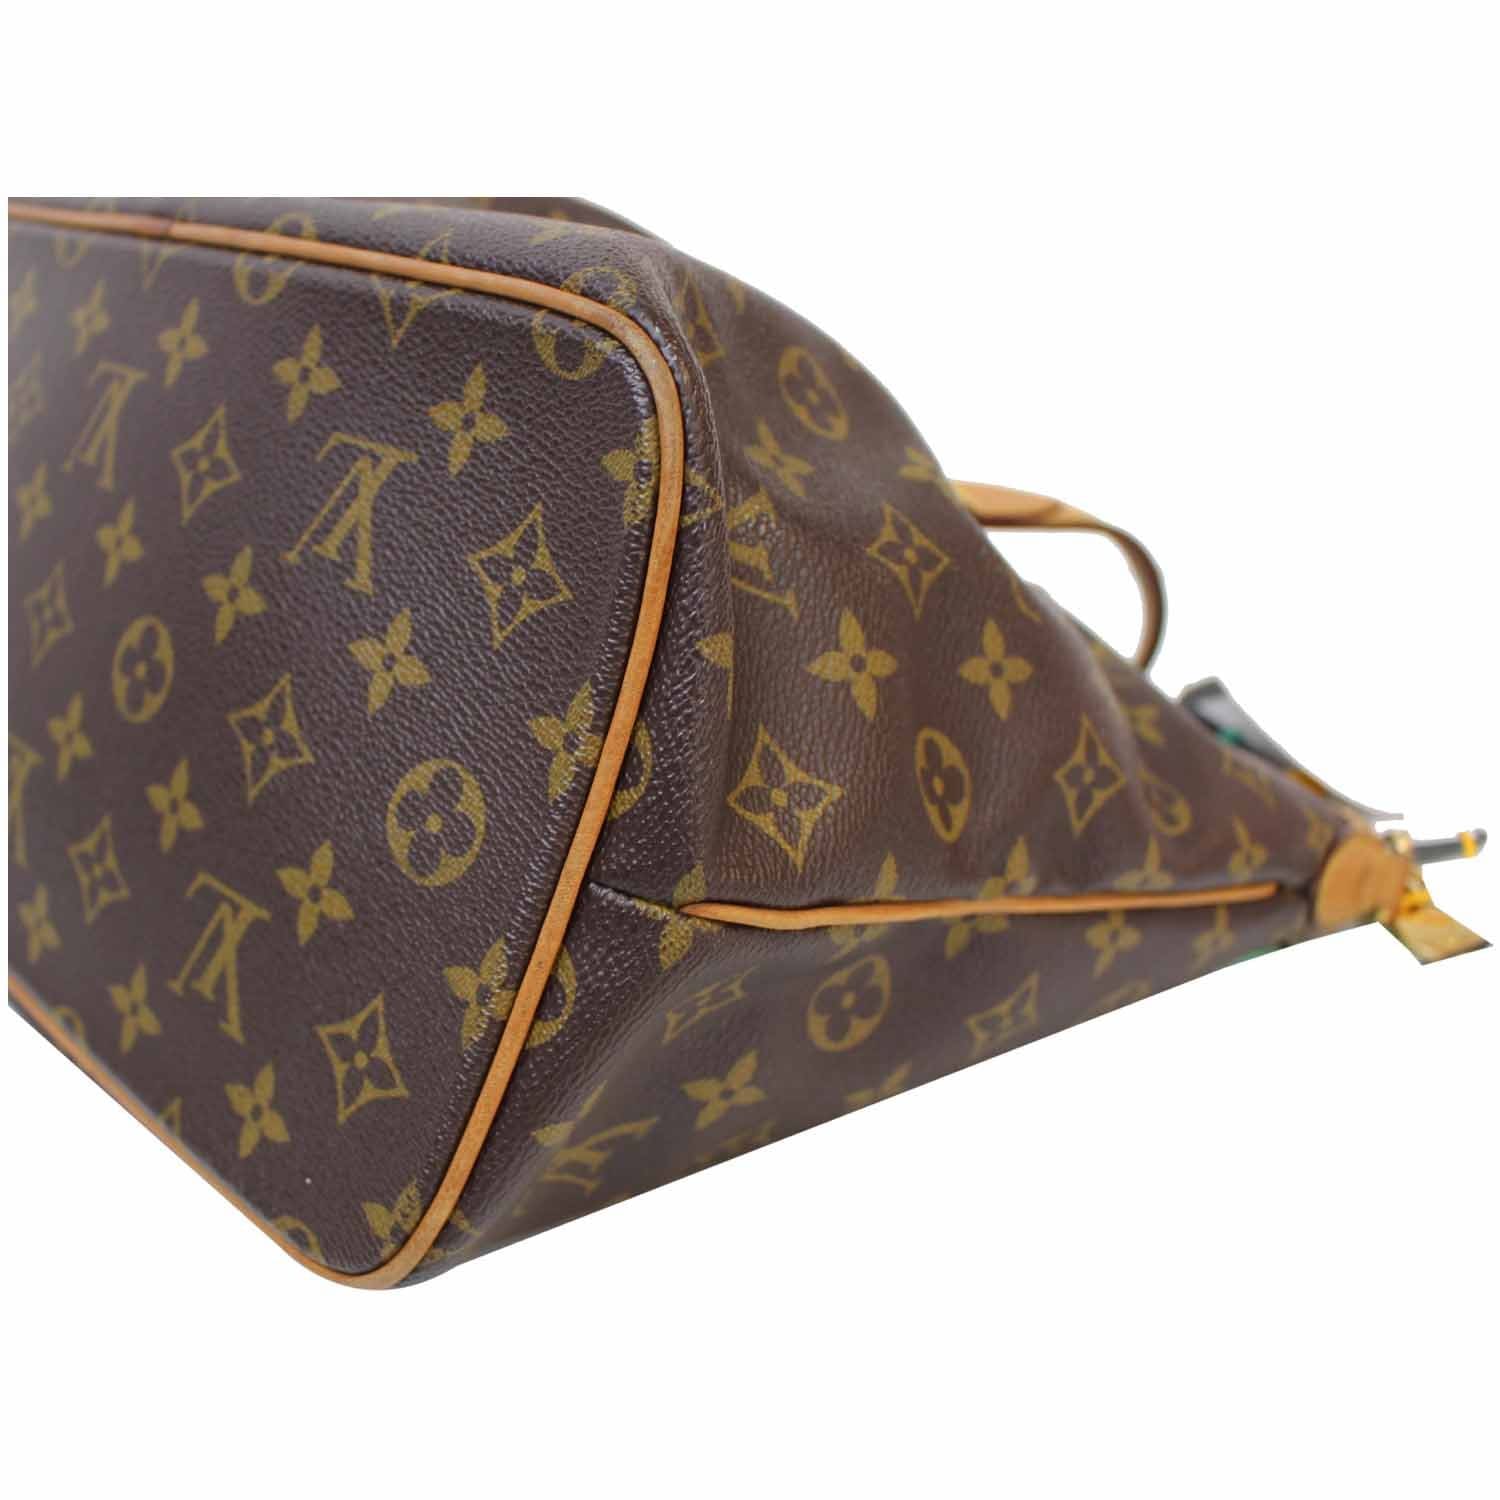 Pin by 𝒩 on BAG  Bags, Vuitton, Louis vuitton